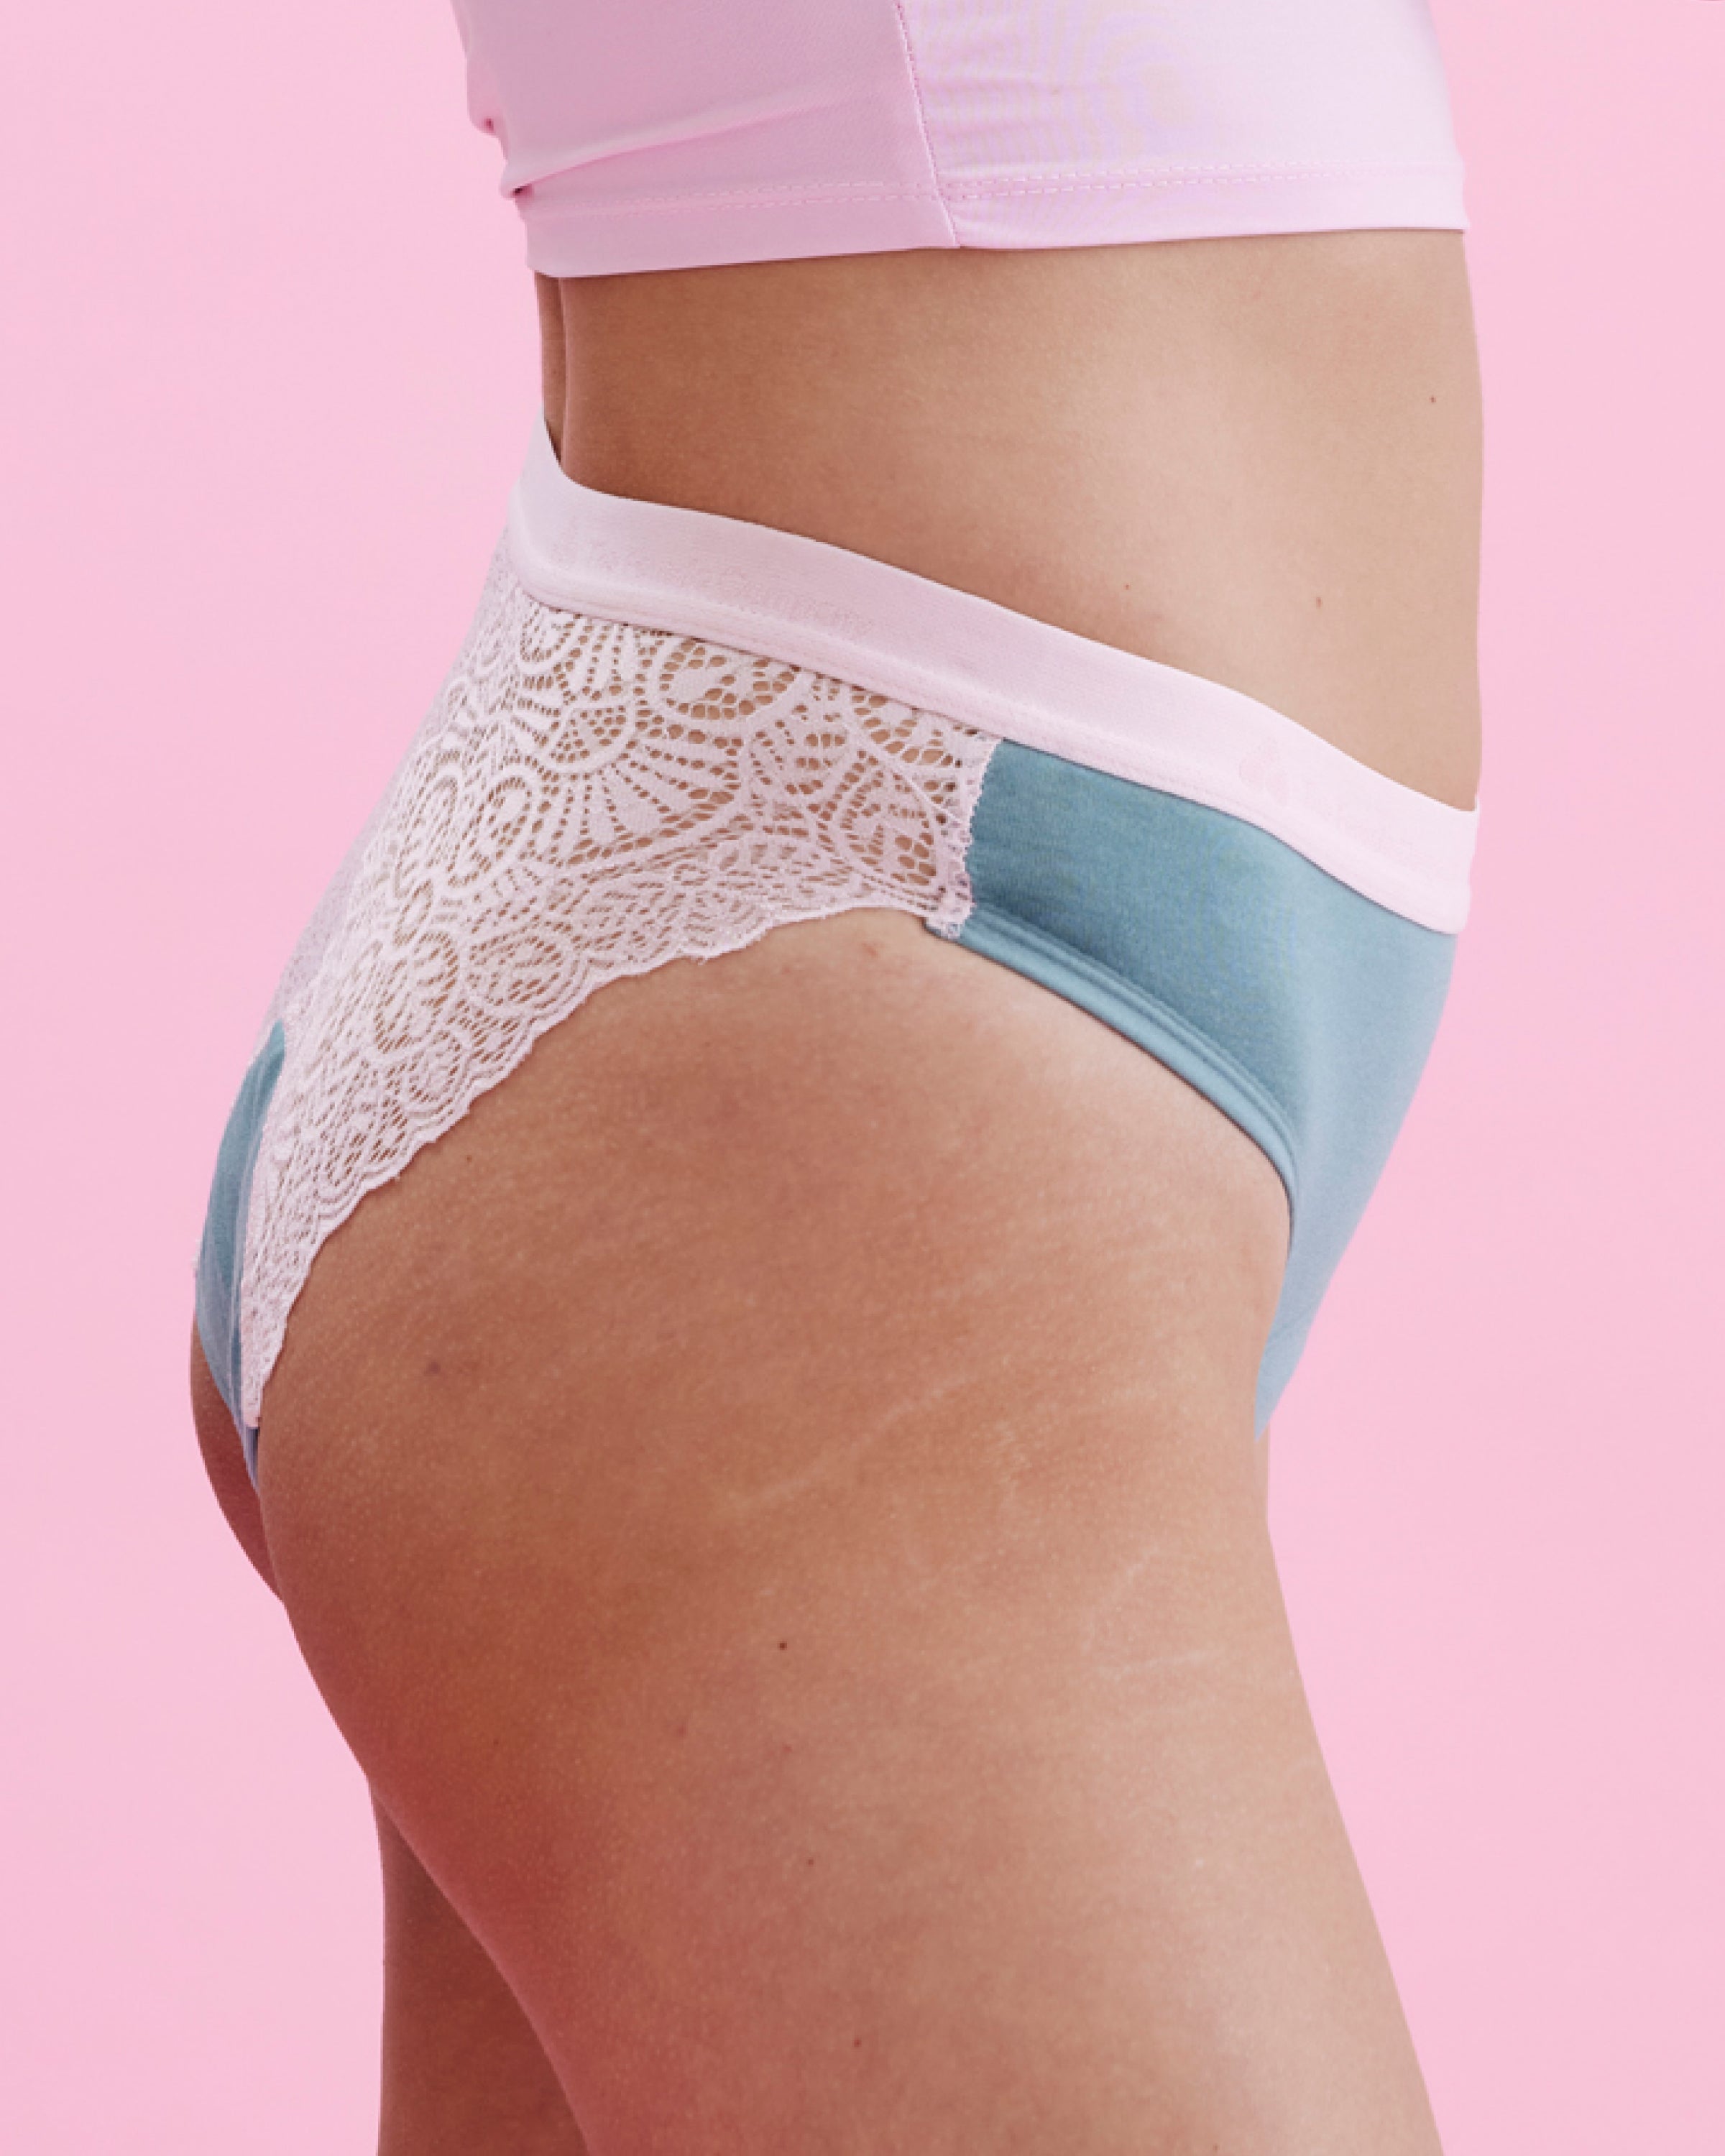 Period panty brief lace in blue and pink shop online